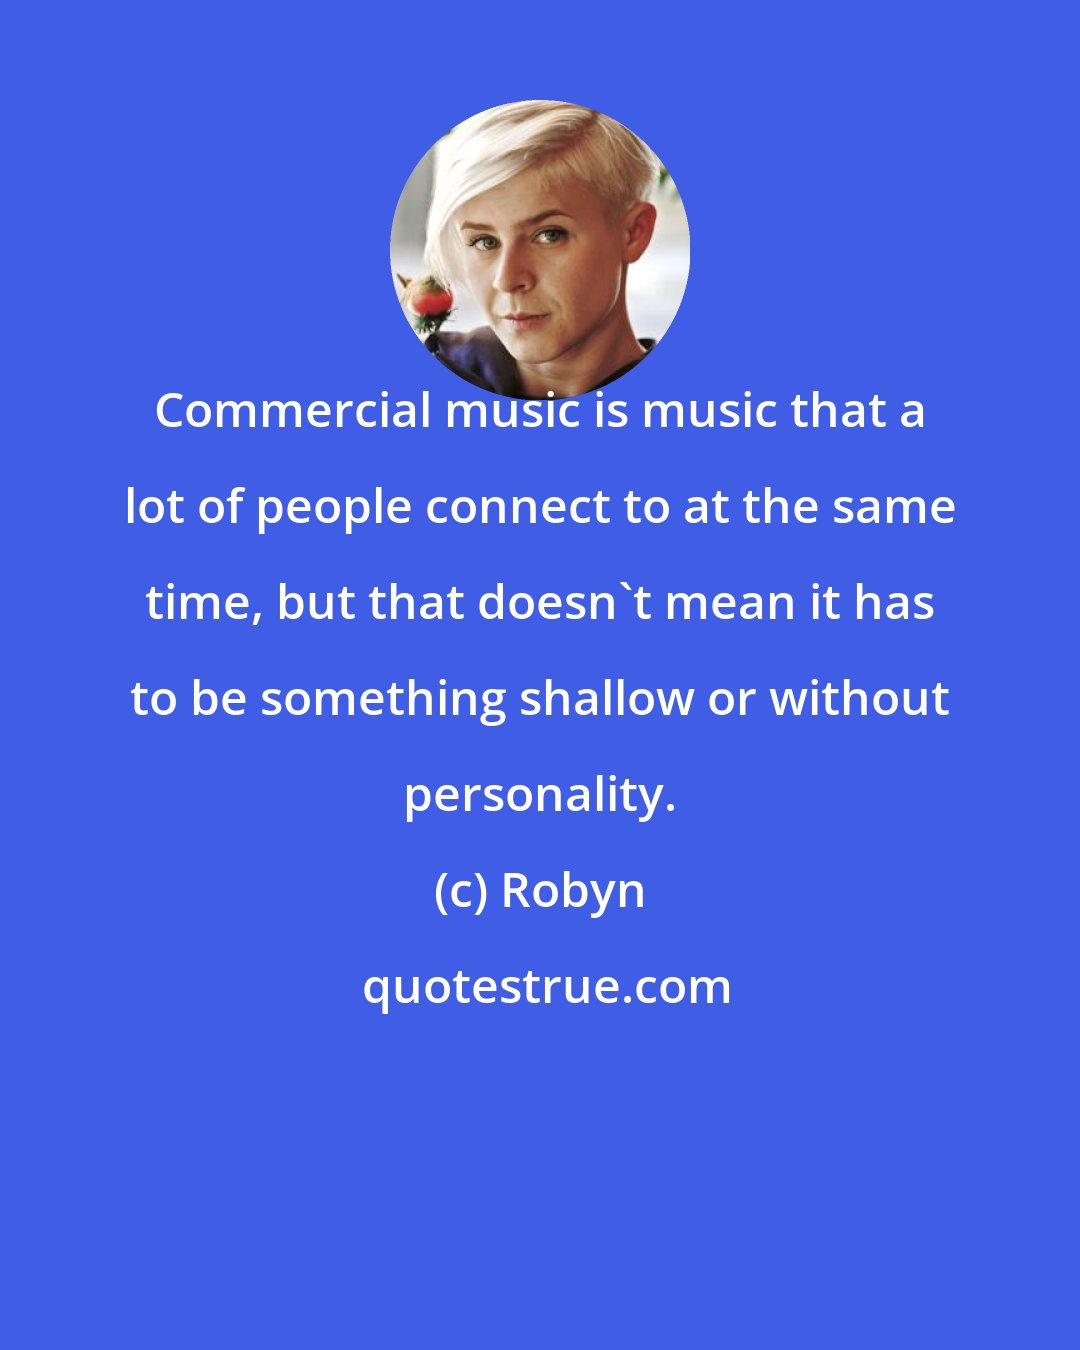 Robyn: Commercial music is music that a lot of people connect to at the same time, but that doesn't mean it has to be something shallow or without personality.